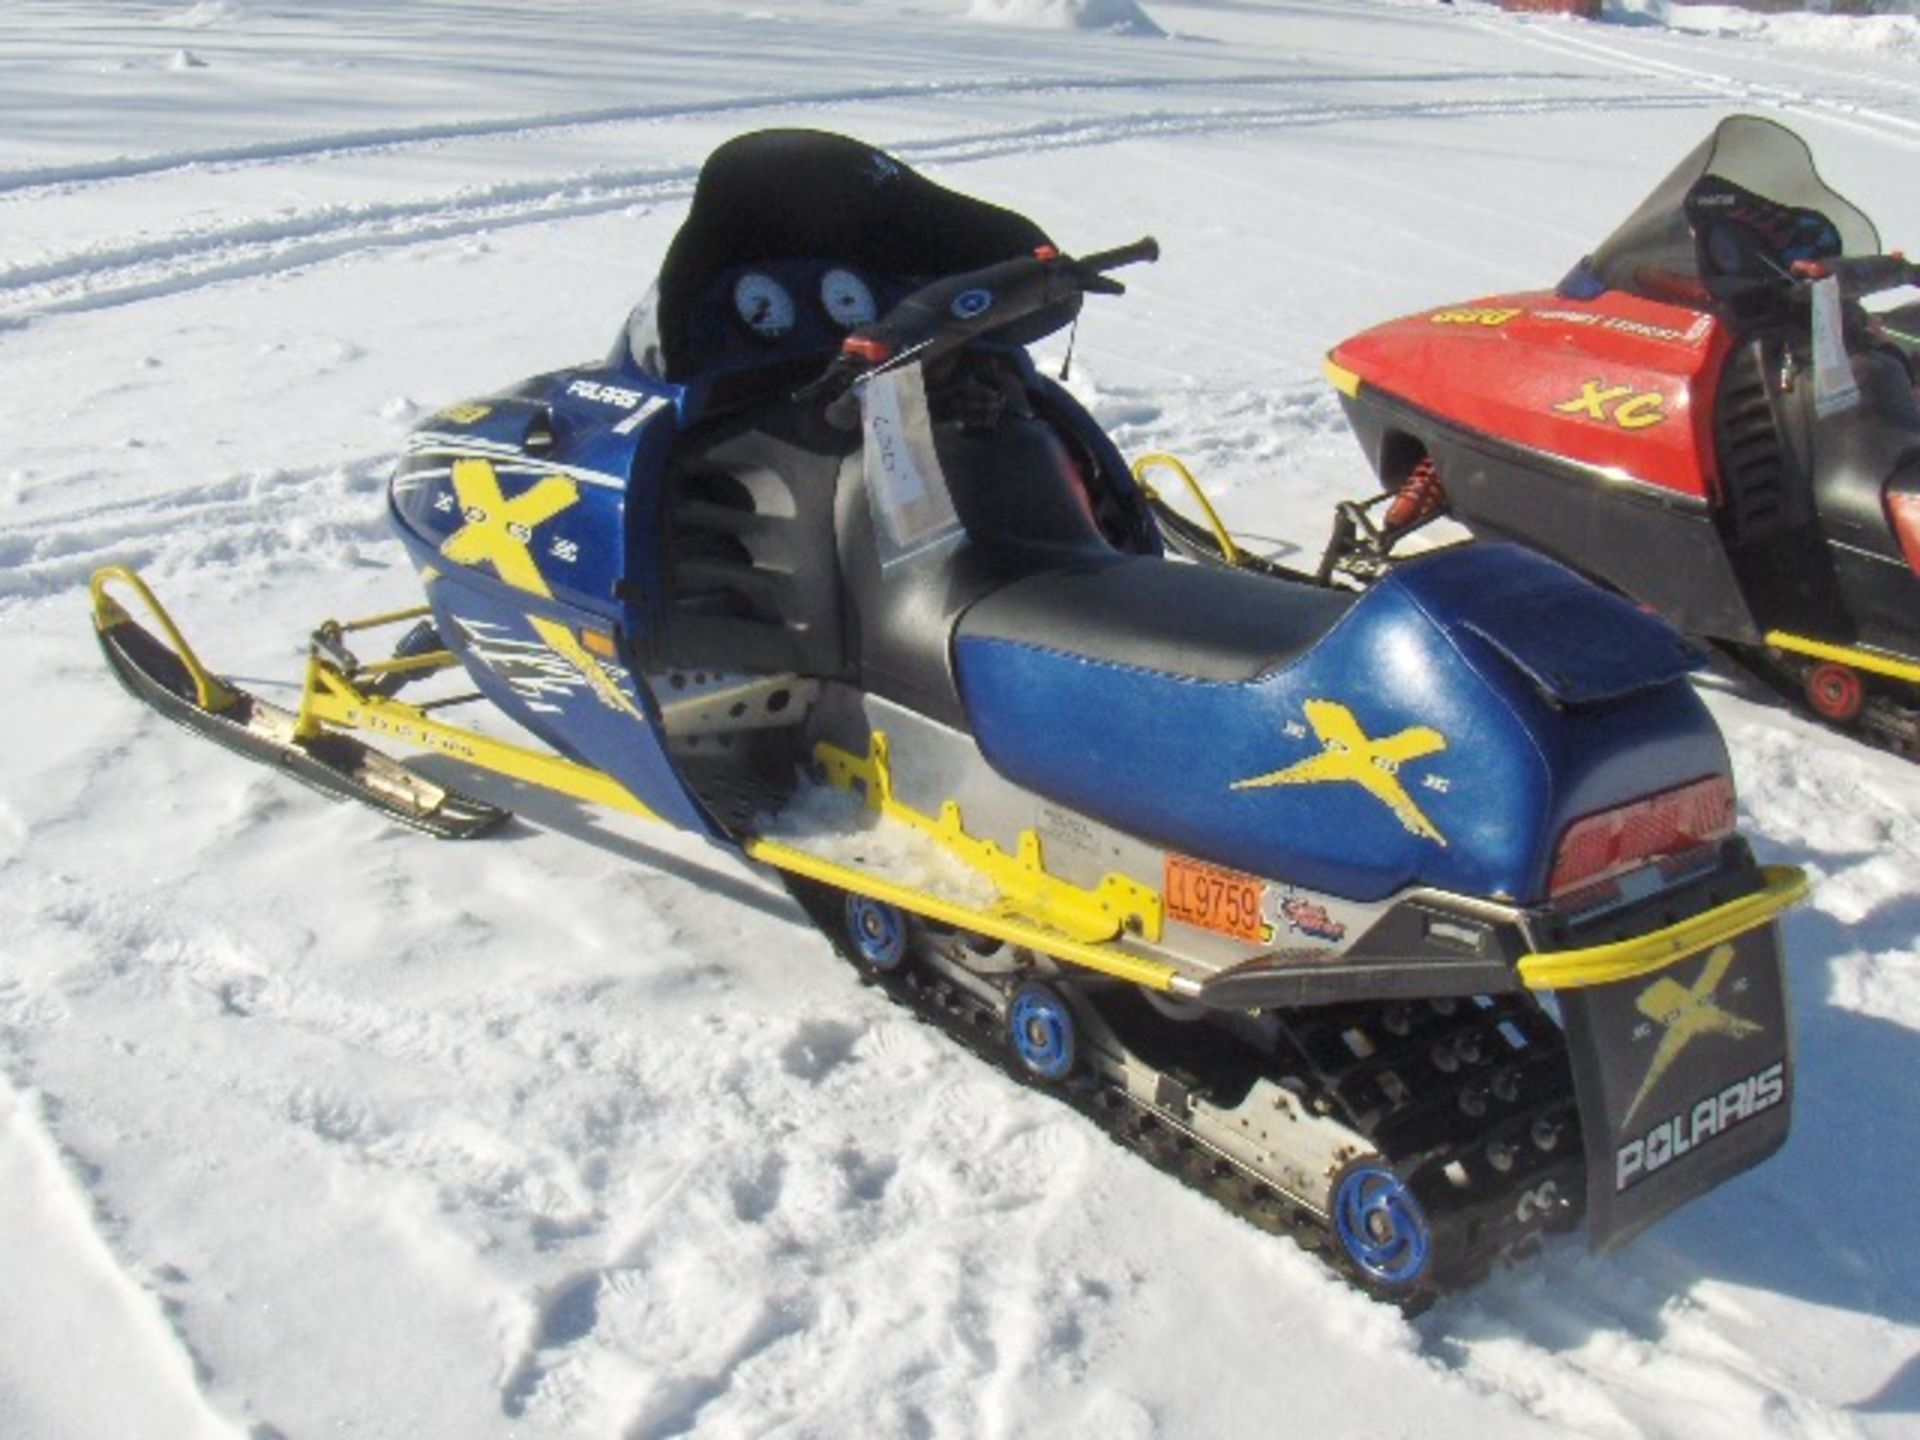 2002 POLARIS 700 EDGE  4XANP7CS926246745 snowmobile, owner started at time of auction check in, sold - Image 4 of 4